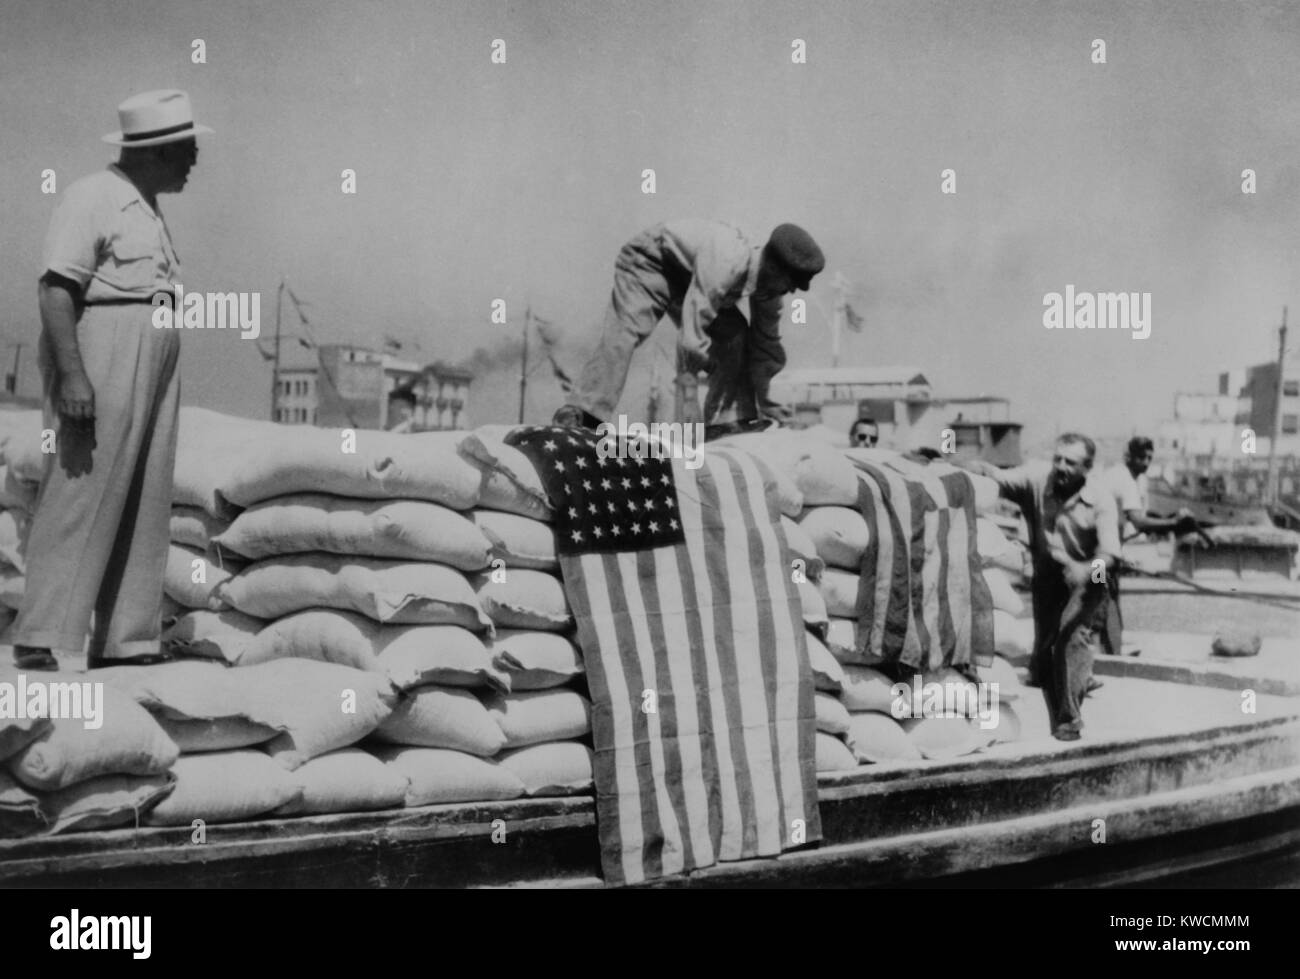 Sacks of flour, the first relief supplies from the United States, being unloaded in the port of Piraeus. American and Greek flags are displayed. 1947. The U.S. economic aid to the Rightist-Royalist side of the Greek Civil War became the model for the Marshall Plan. - (BSLOC 2014 15 226) Stock Photo